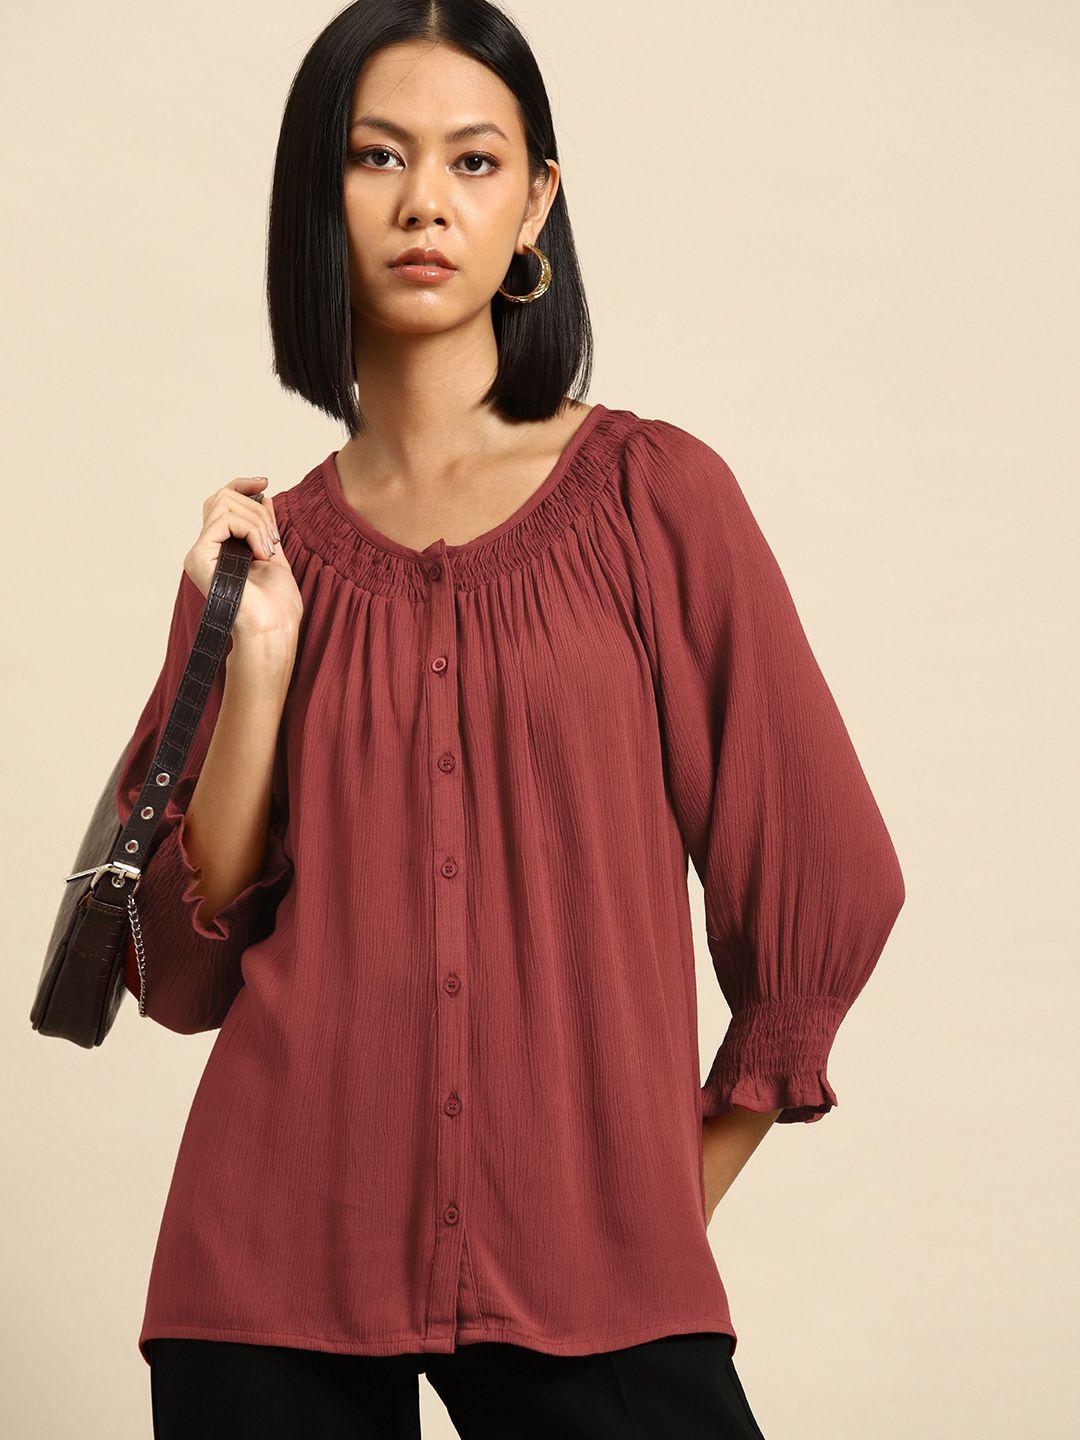 all about you puff sleeve shirt style top